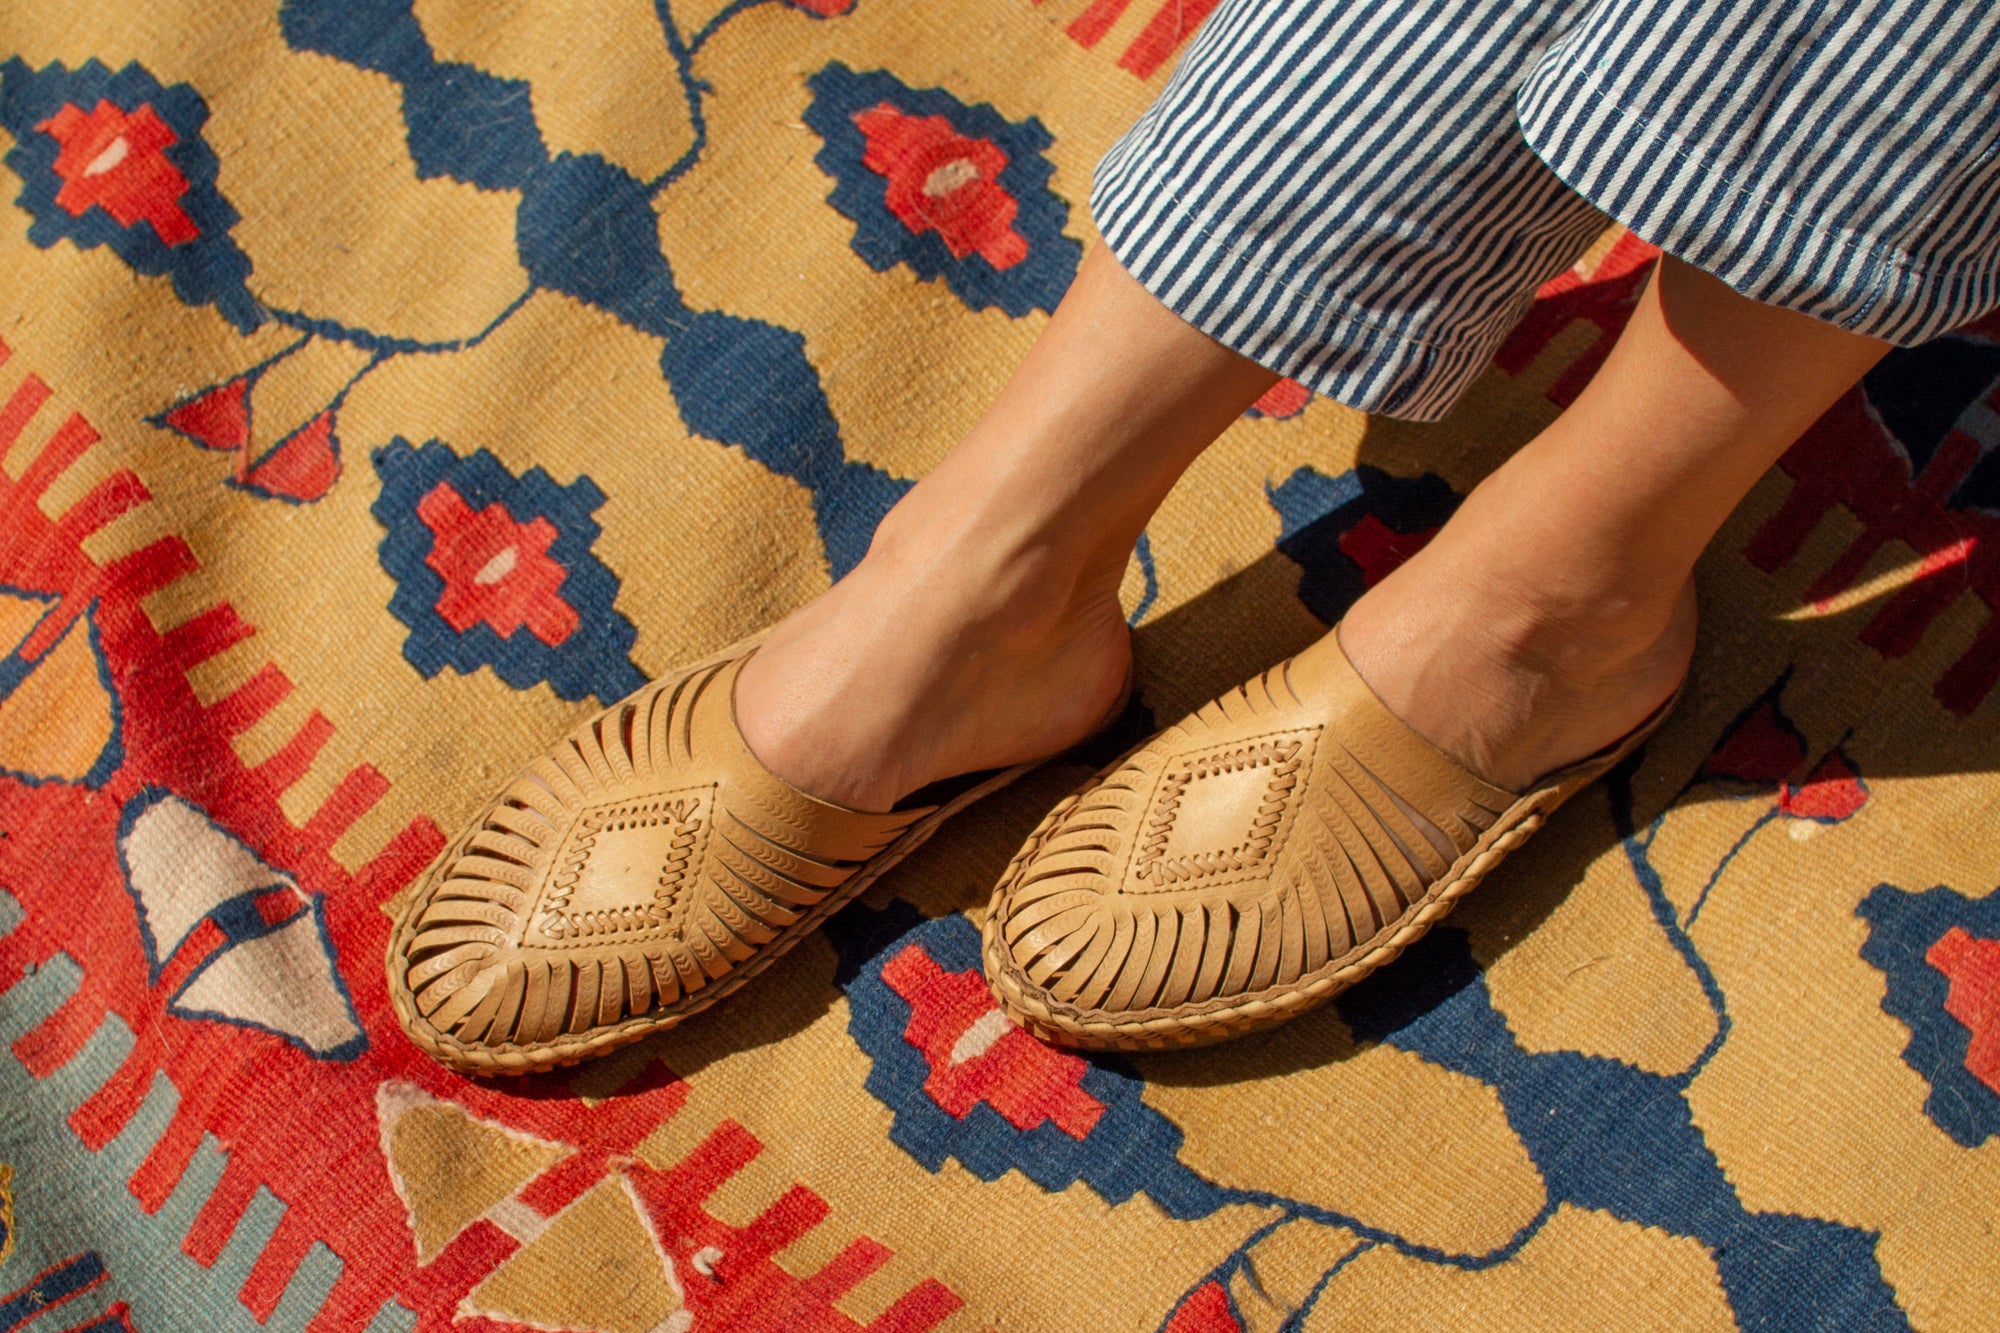 Female wearing natural leather slip-on sandals with hand-woven diamond centerpiece on colorful rug